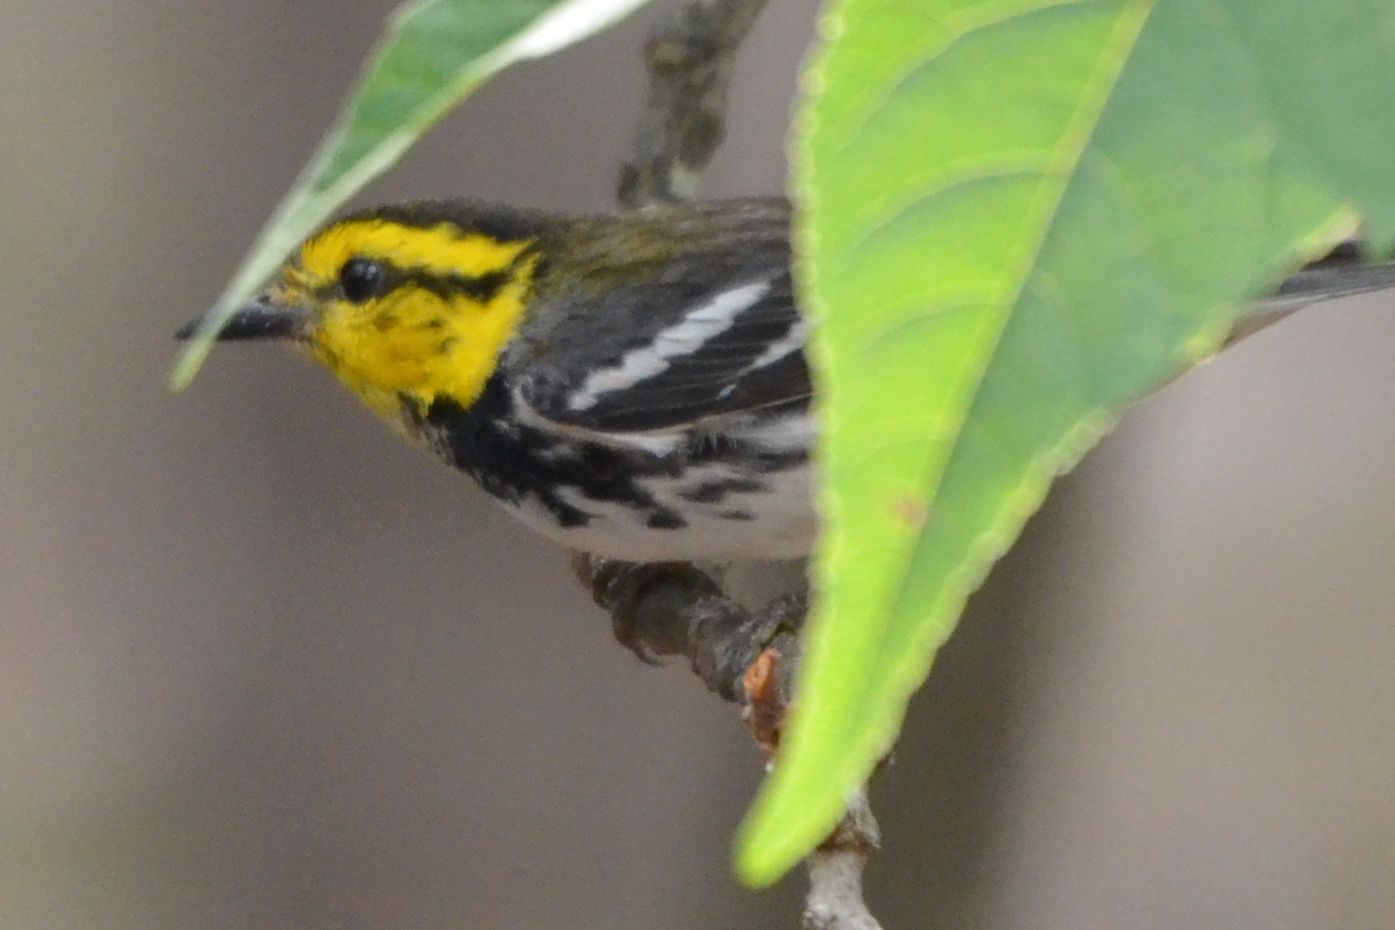 Click picture to see more Golden-cheeked Warblers.